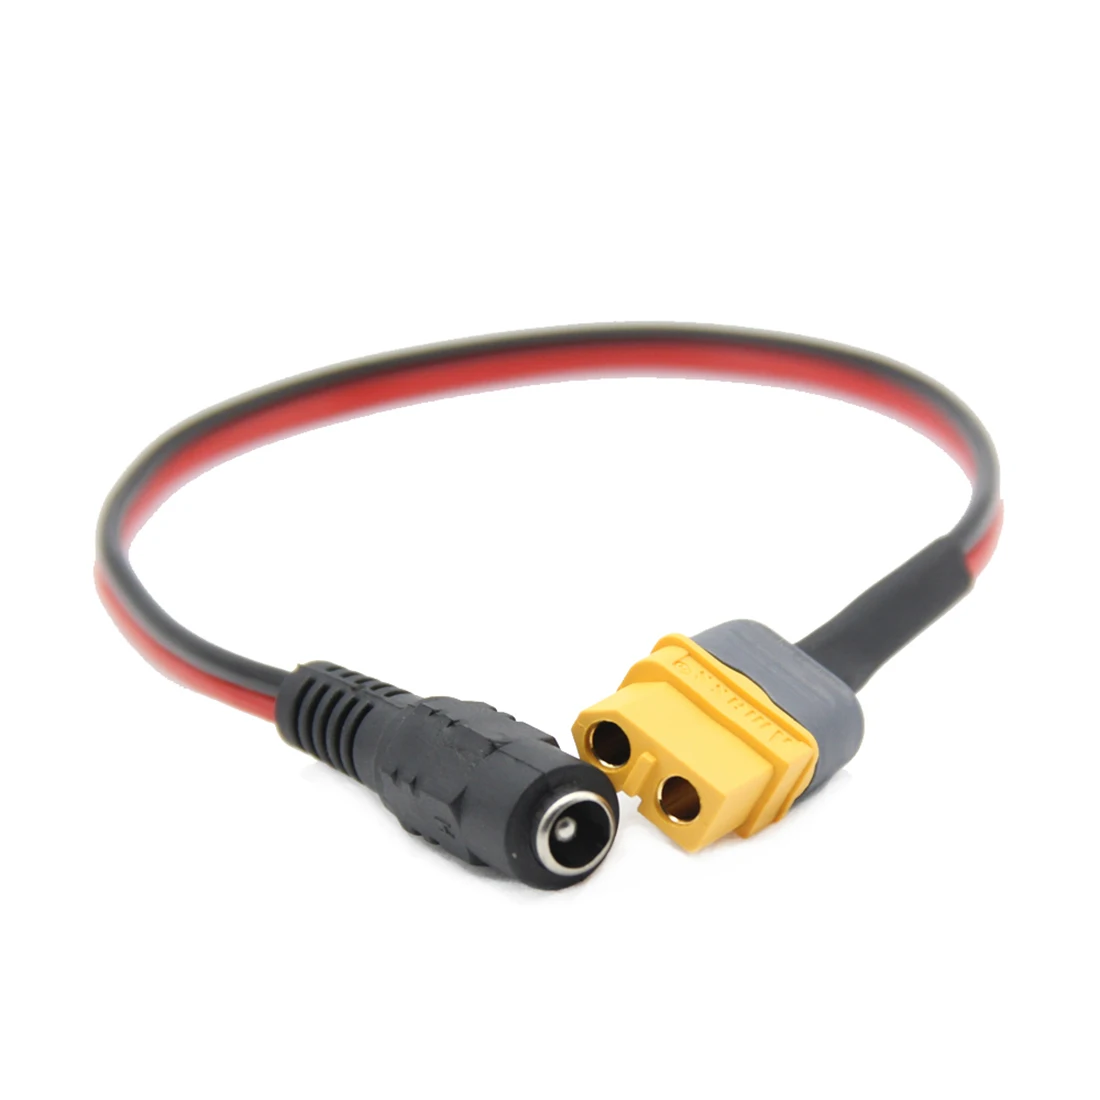 

Goggles B6 Charger Cable Battery Charging Cable Adapter XT60 XT30 Plug to DC 5.5 2.1mm for Fatshark Skyzone 03 FPV